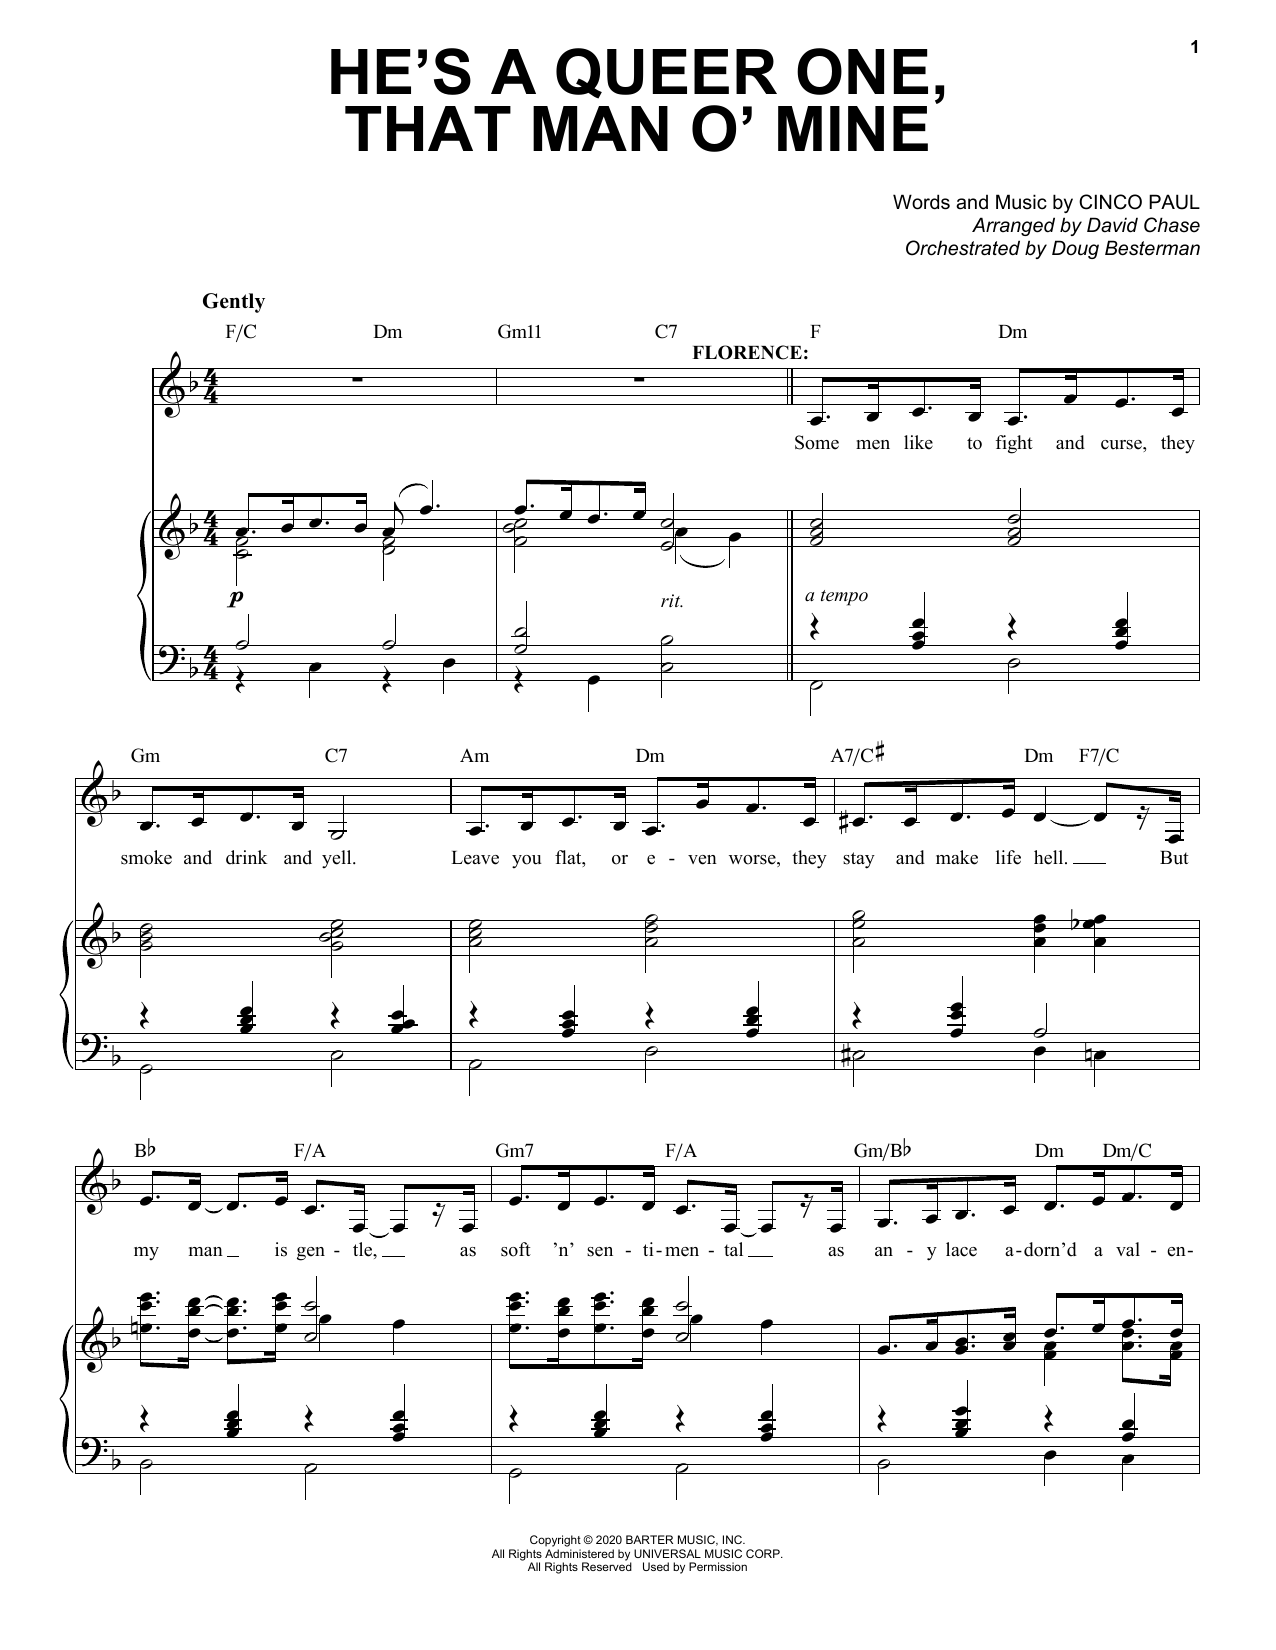 Download Cinco Paul He's A Queer One, That Man O' Mine (fro Sheet Music